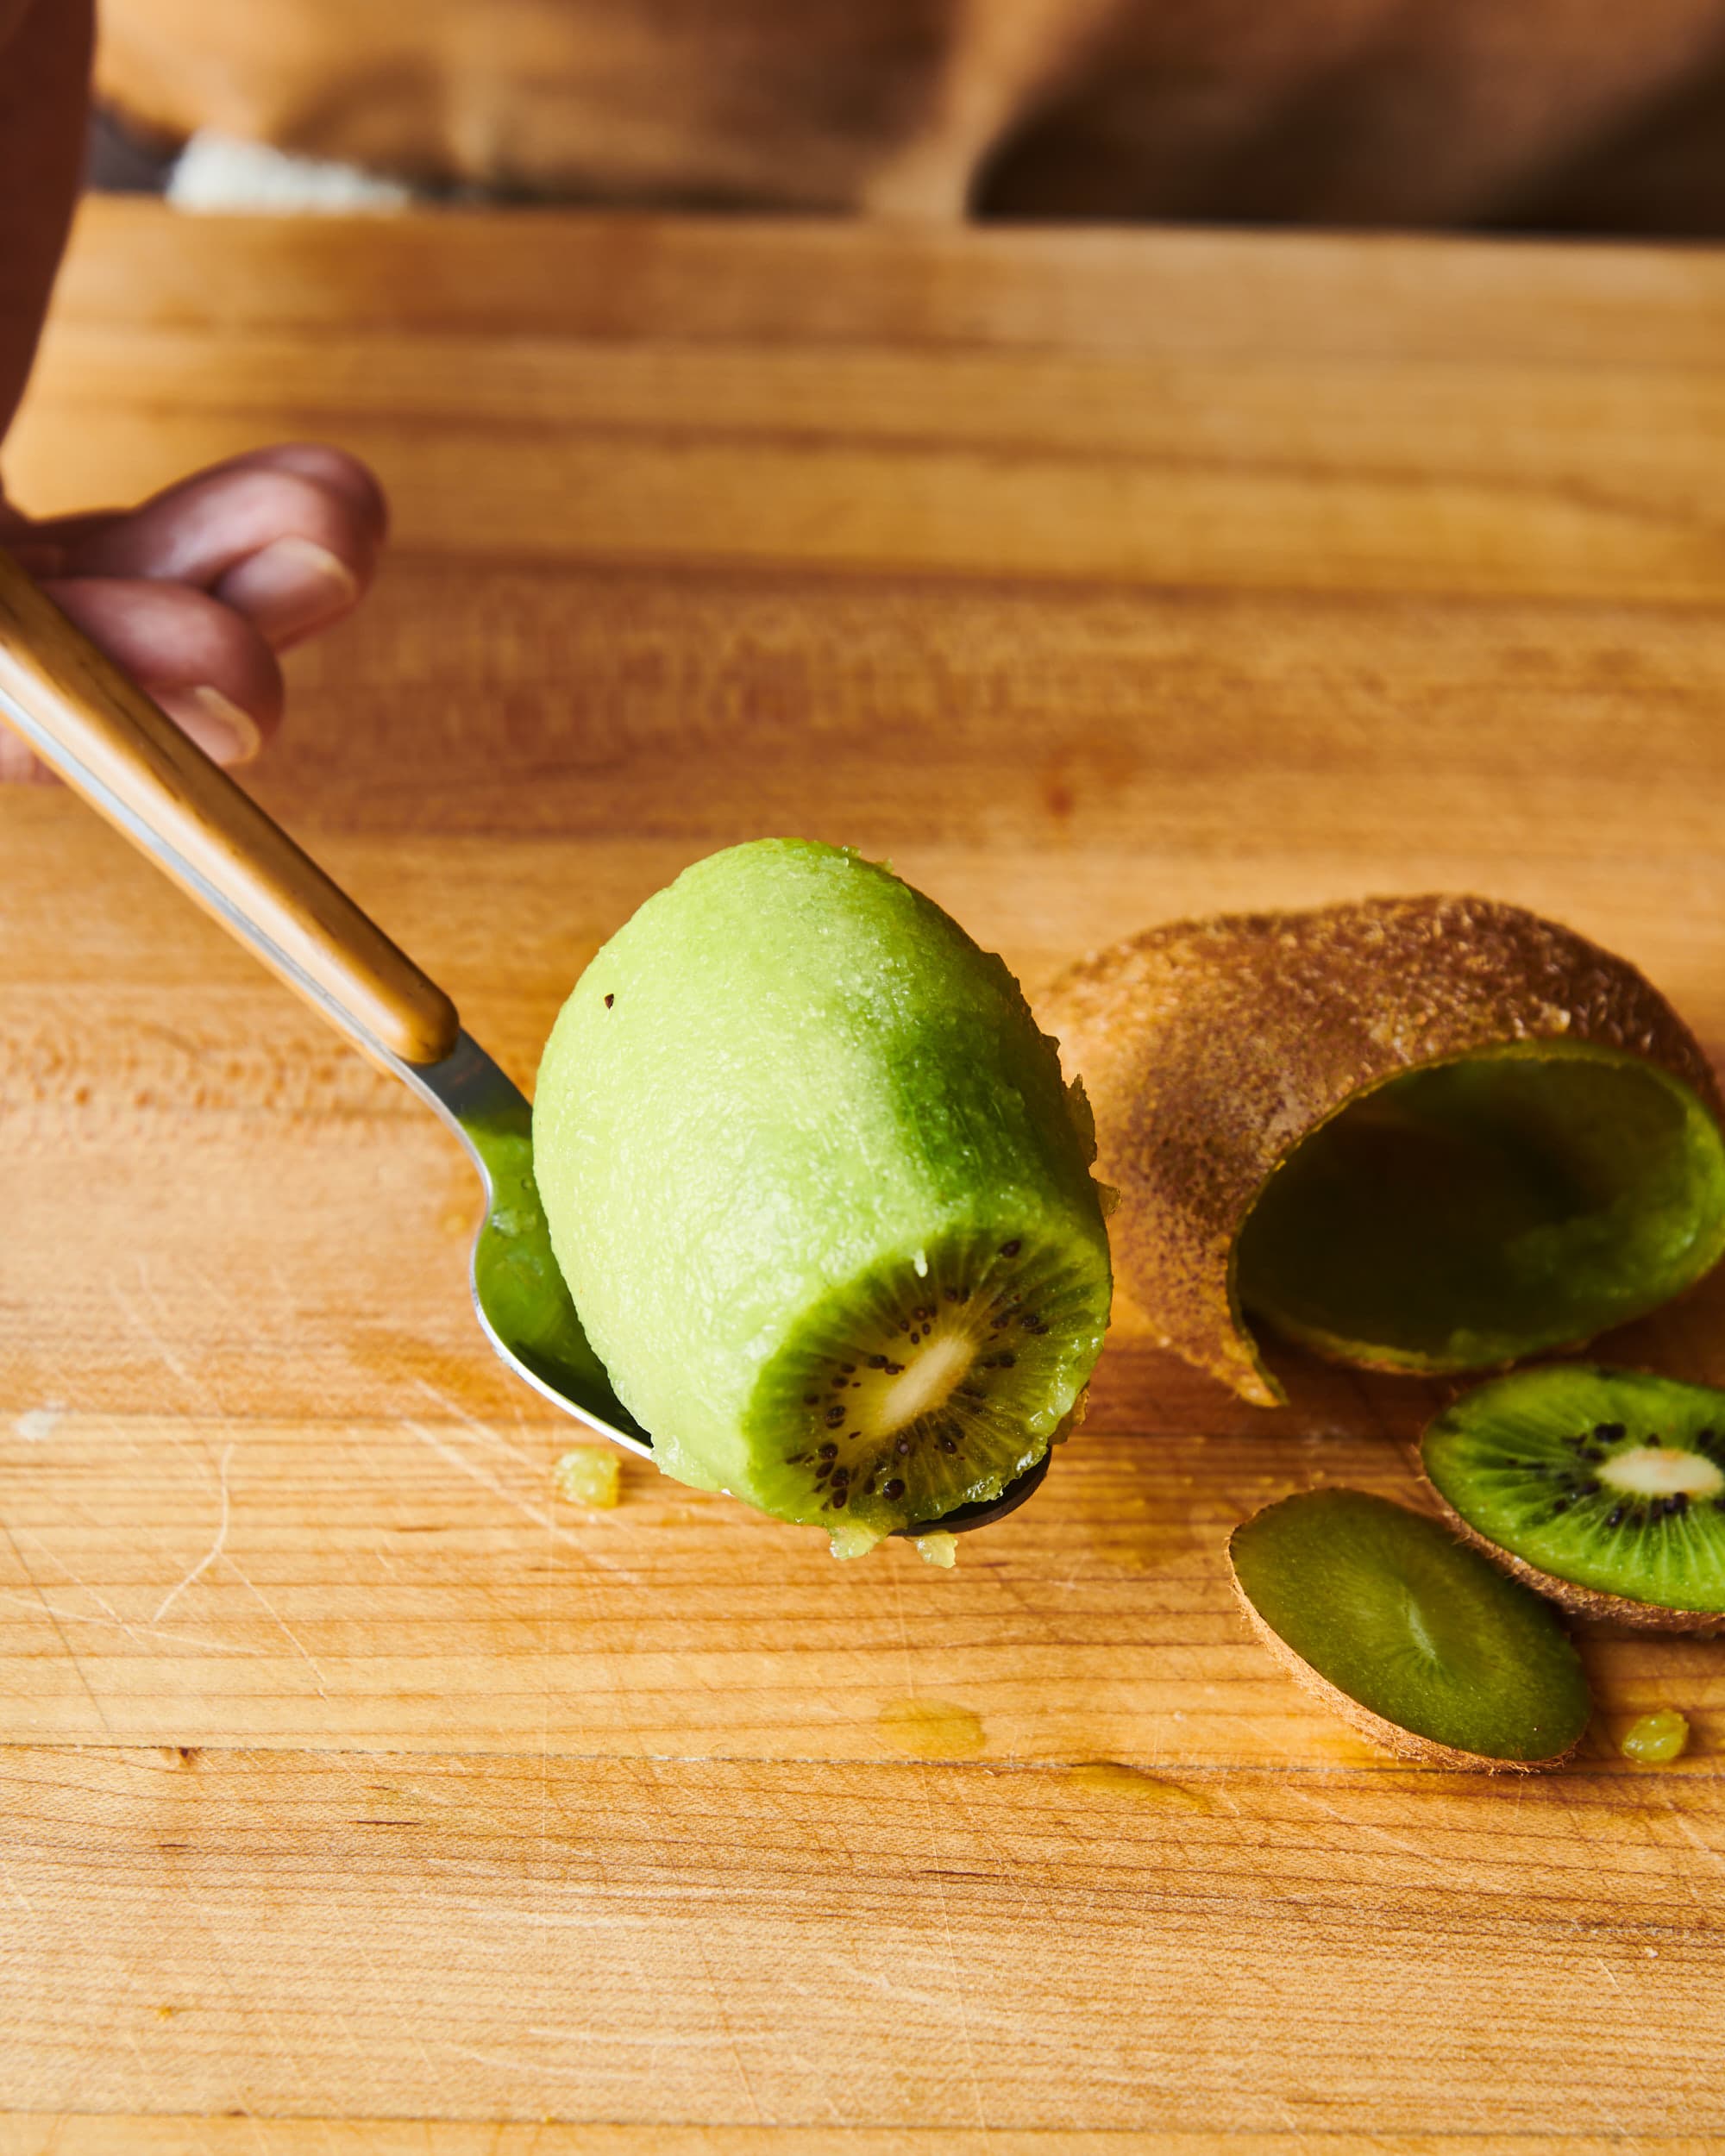  Fast Peel Any Fruit Or Soft Vegetable With Ease. Kiwi